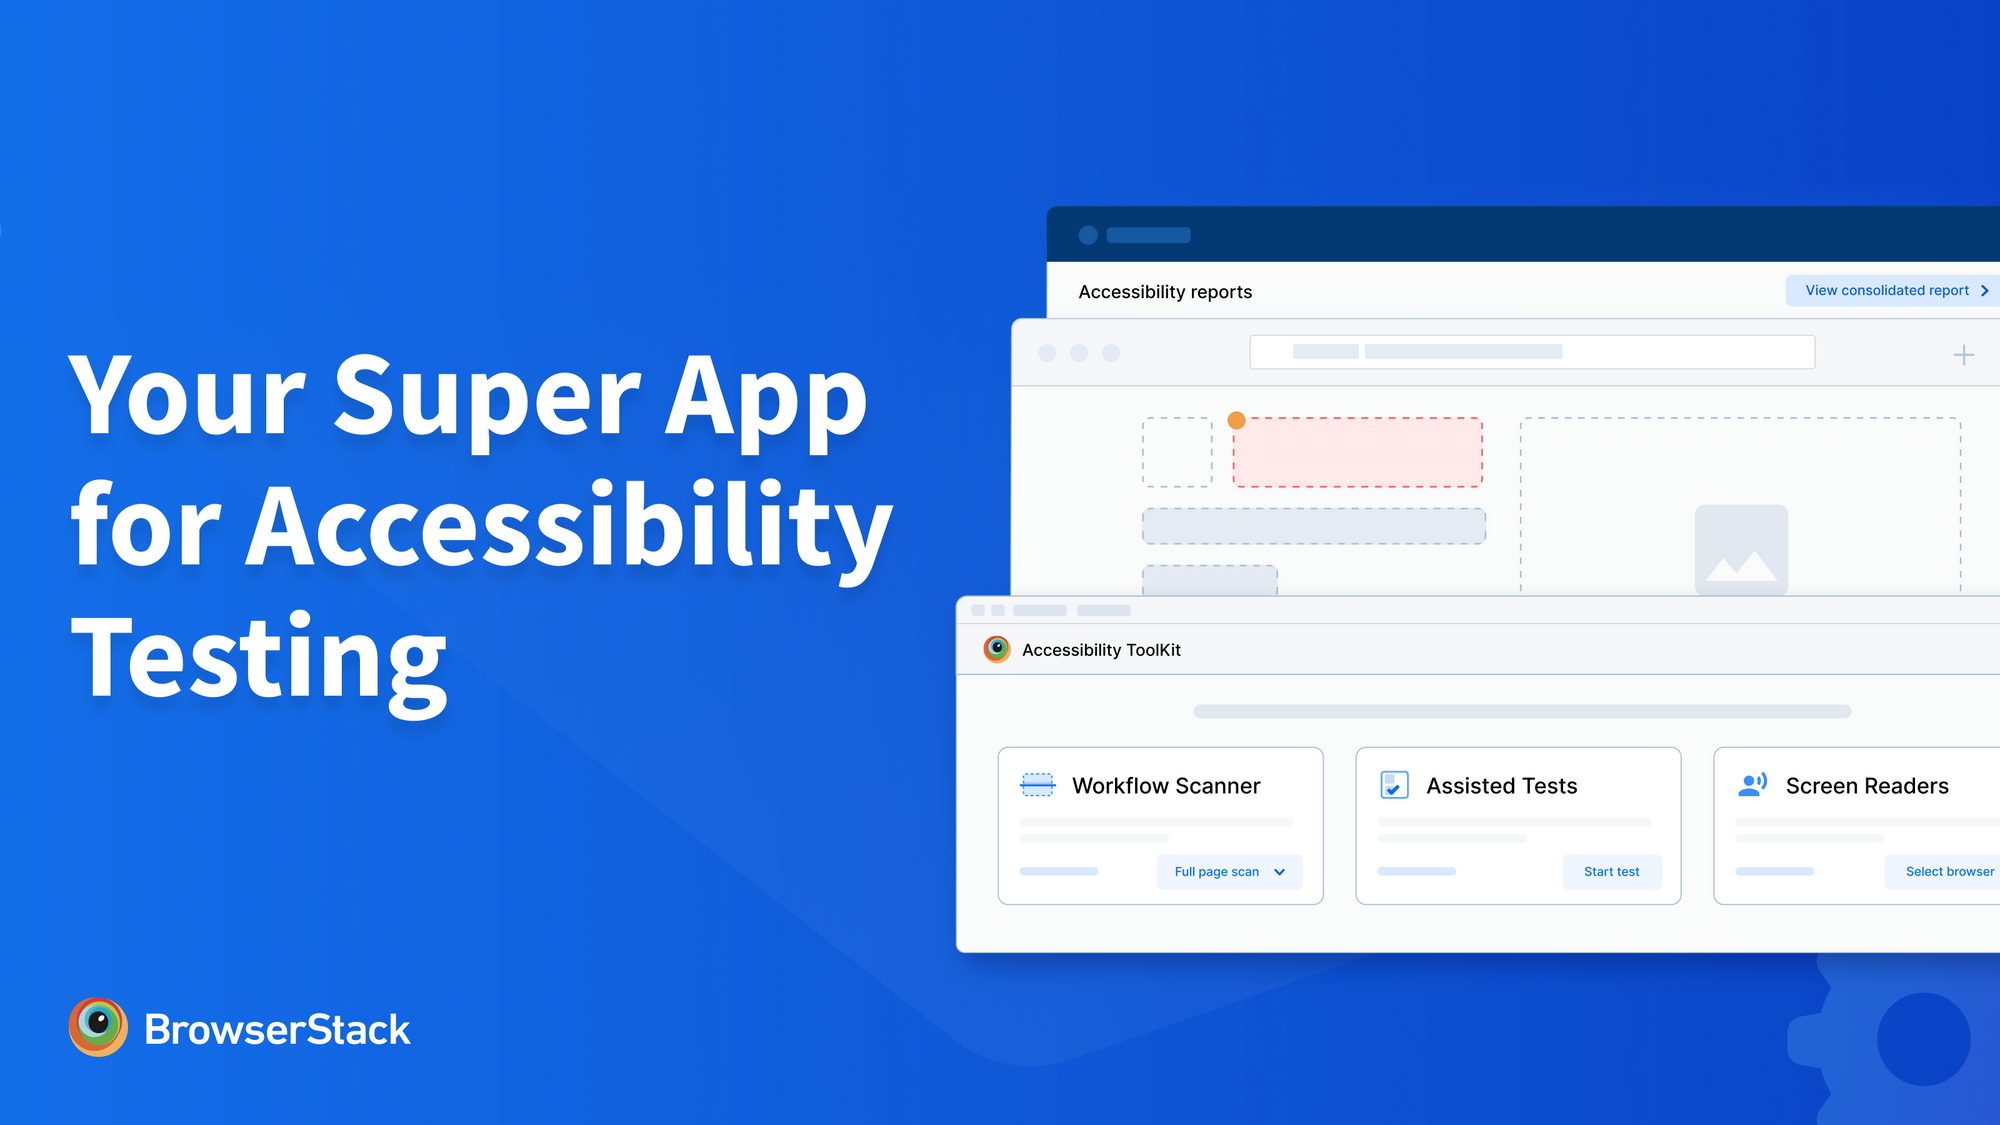 BrowserStack Accessibility Testing